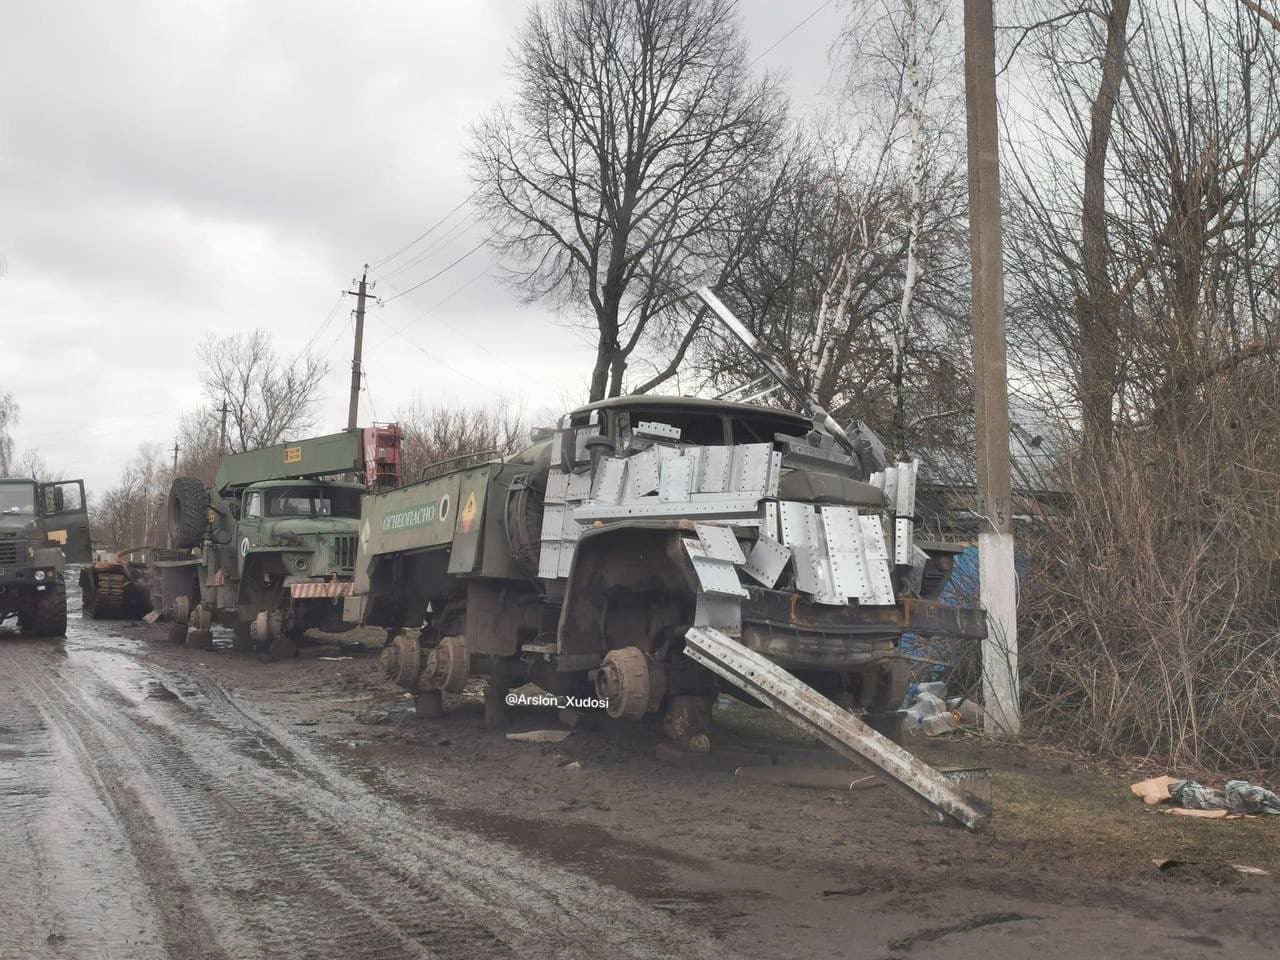 Russians are Trying to Survive in Ukraine by Armoring Their Trucks Artisanally, Defense Express